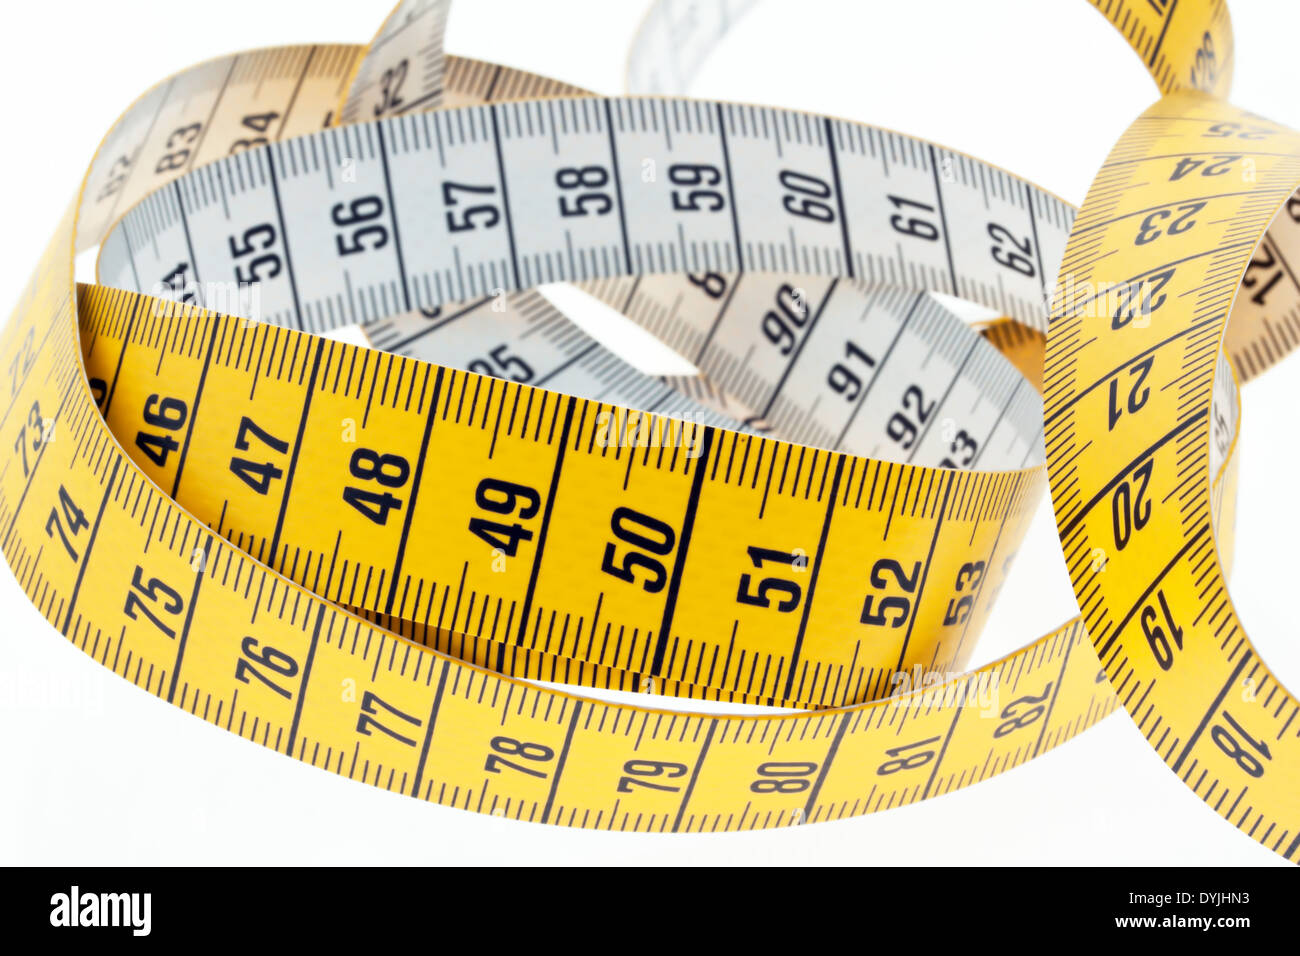 Tape Measure In Yellow Measuring In Inches Stock Photo - Download Image Now  - Tape Measure, Cut Out, White Background - iStock